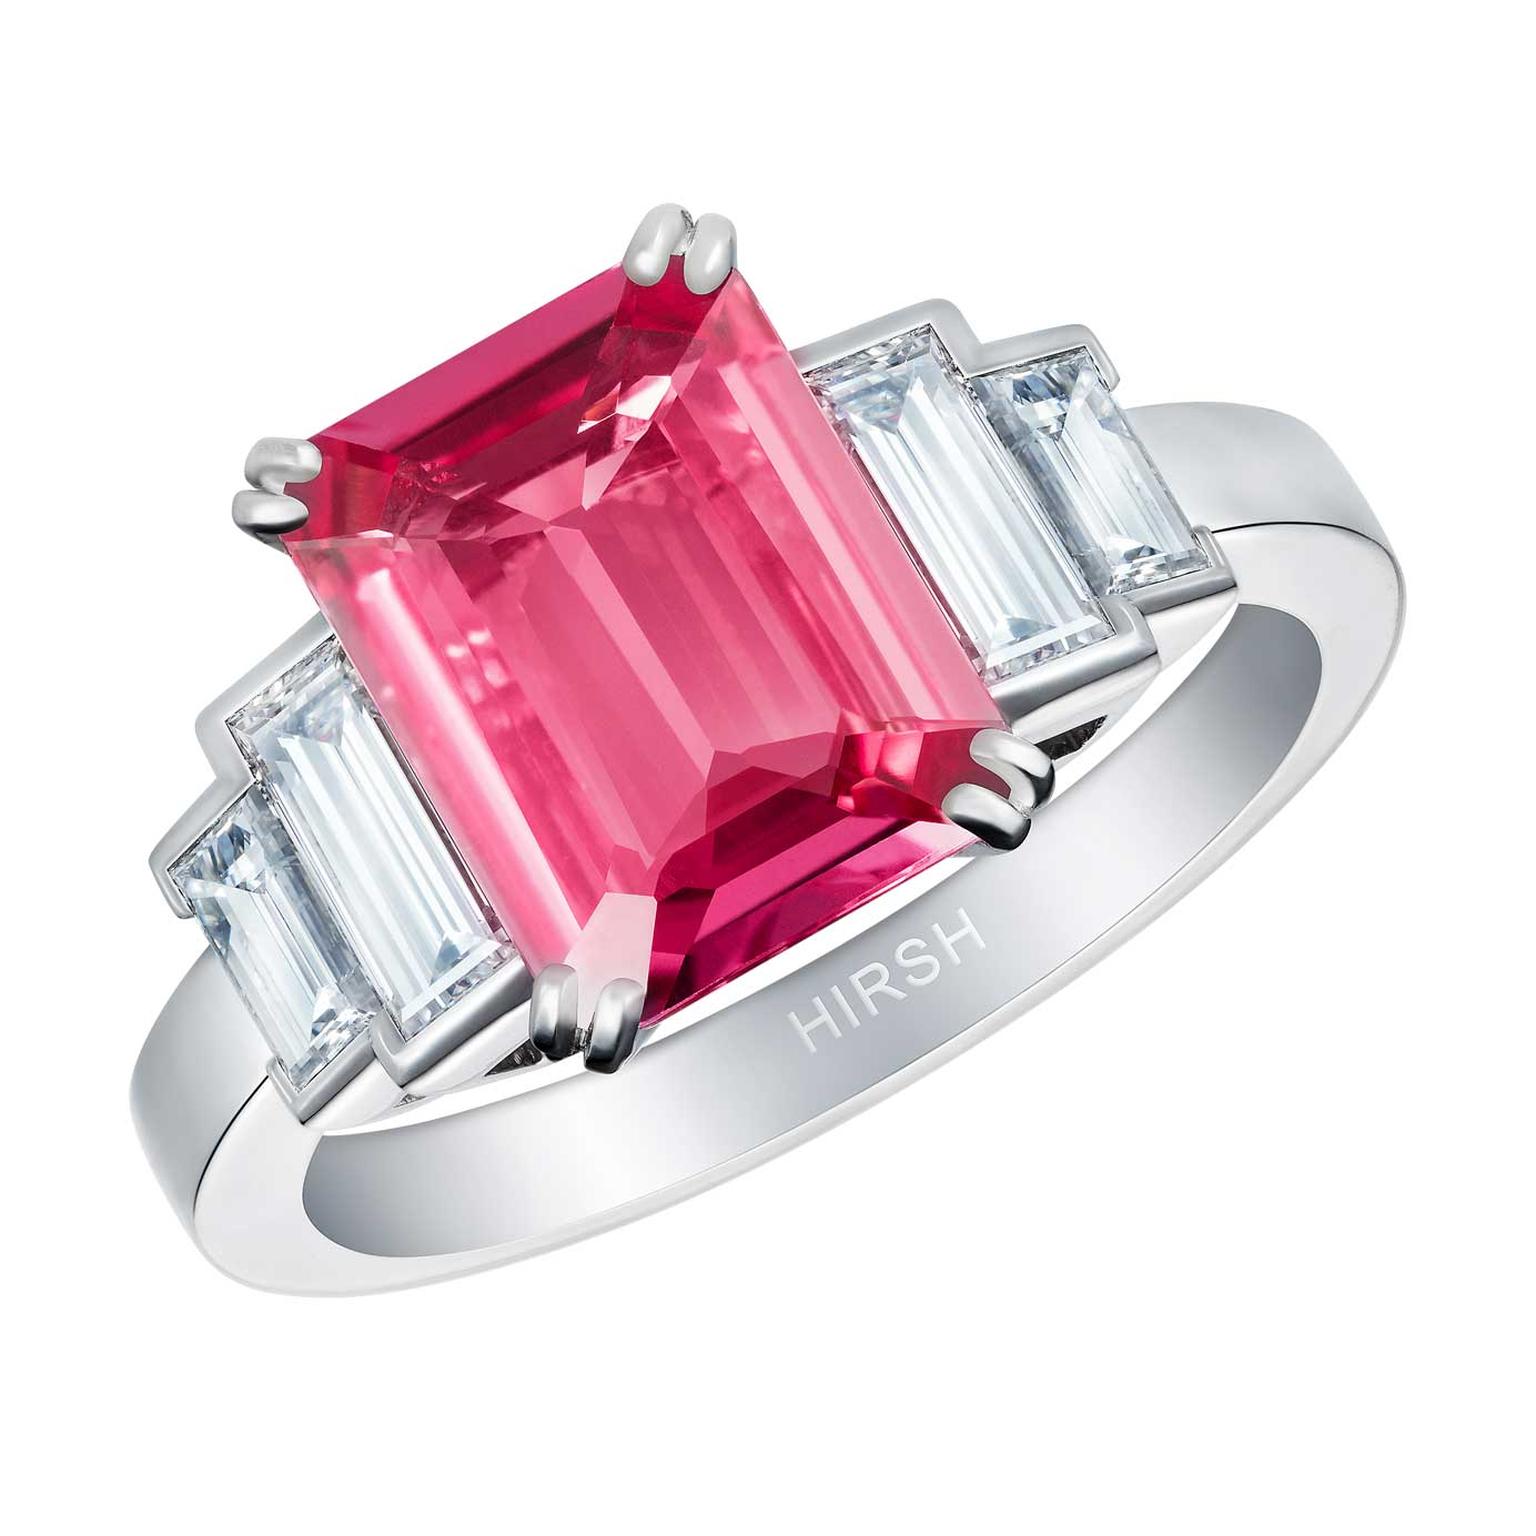 Pretty in pink: jewels that melted our heart